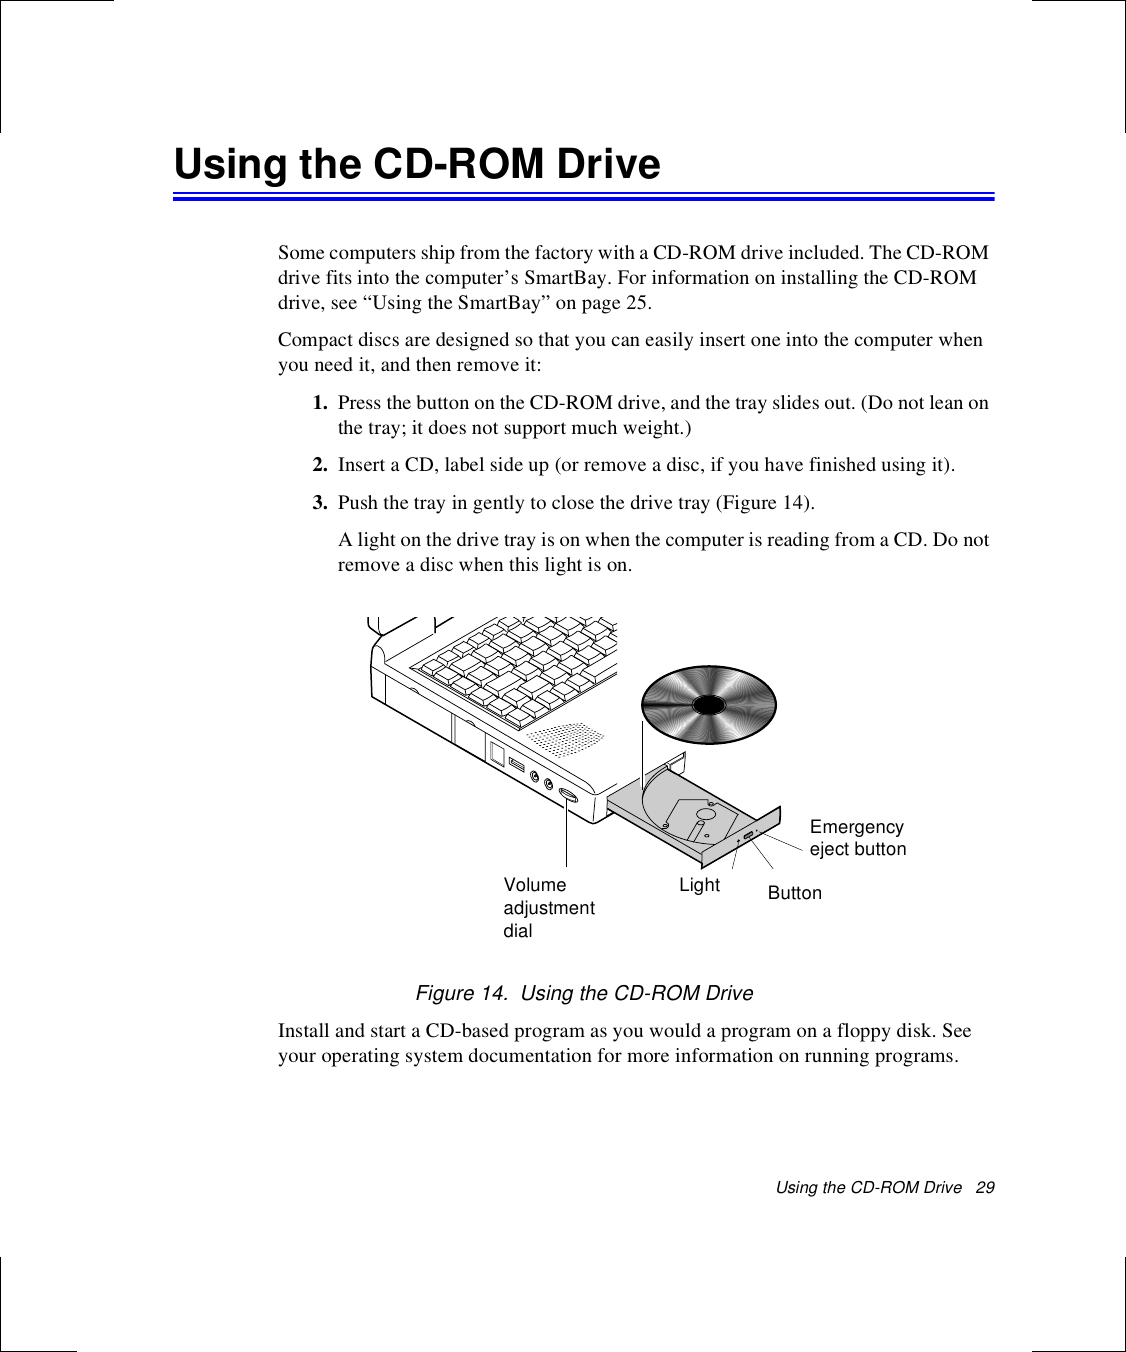 Using the CD-ROM Drive   29Using the CD-ROM DriveSome computers ship from the factory with a CD-ROM drive included. The CD-ROM drive fits into the computer’s SmartBay. For information on installing the CD-ROM drive, see “Using the SmartBay” on page 25.Compact discs are designed so that you can easily insert one into the computer when you need it, and then remove it:1. Press the button on the CD-ROM drive, and the tray slides out. (Do not lean on the tray; it does not support much weight.)2. Insert a CD, label side up (or remove a disc, if you have finished using it).3. Push the tray in gently to close the drive tray (Figure 14).A light on the drive tray is on when the computer is reading from a CD. Do not remove a disc when this light is on.Figure 14.  Using the CD-ROM DriveInstall and start a CD-based program as you would a program on a floppy disk. See your operating system documentation for more information on running programs.VolumeadjustmentdialButtonLightEmergency eject button